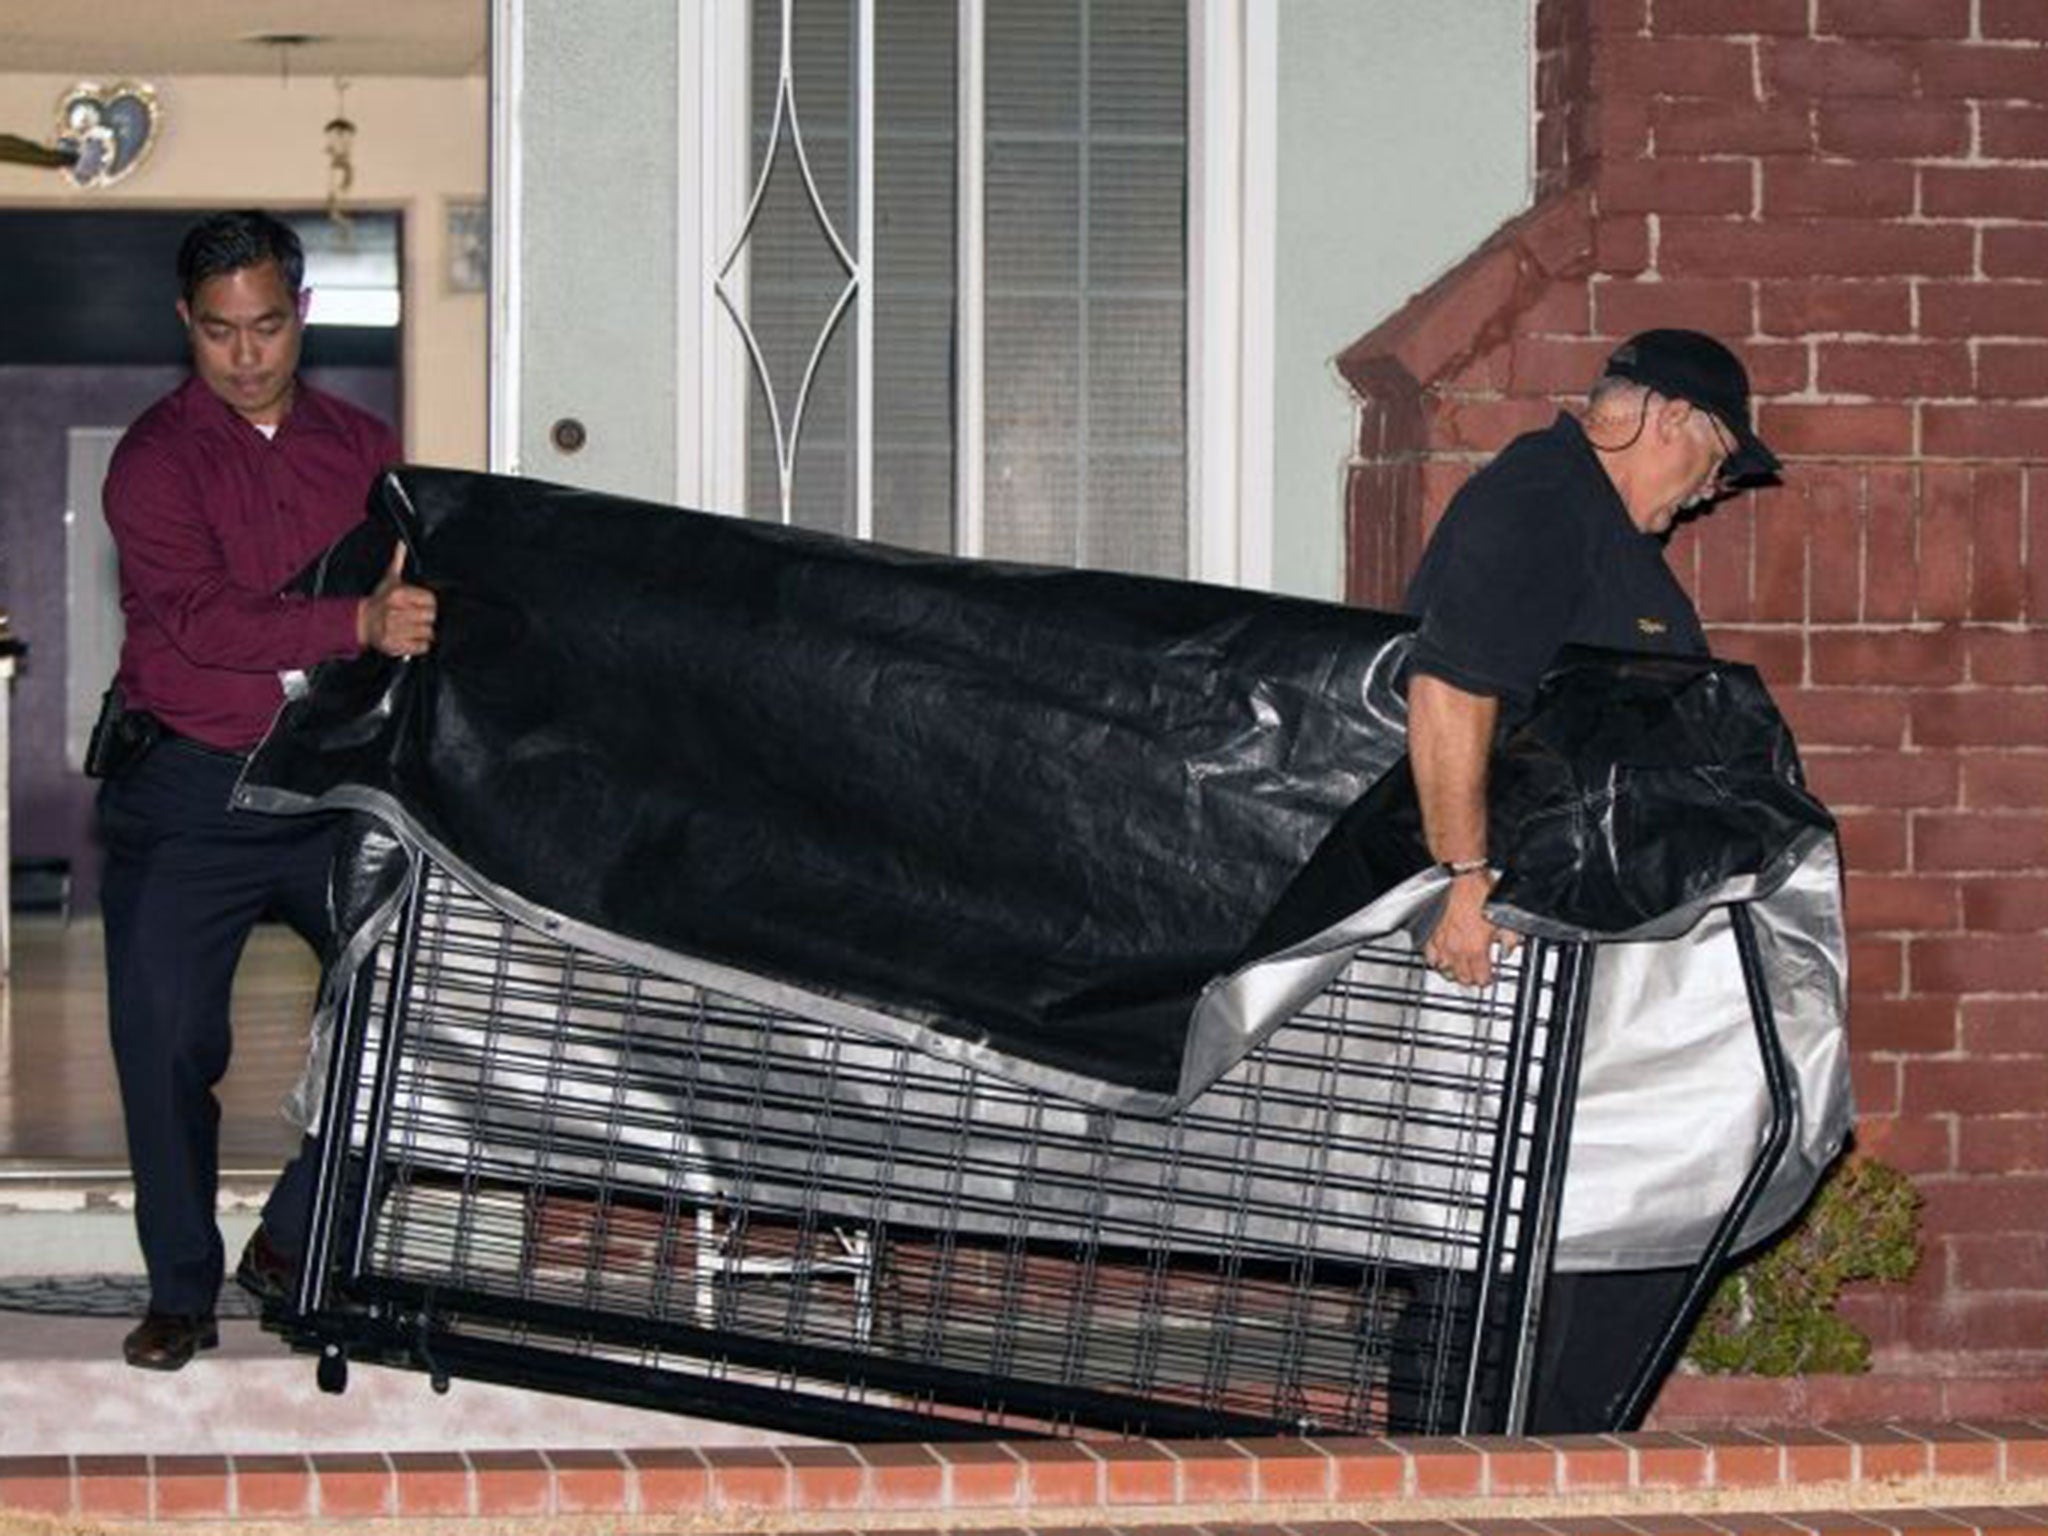 In this Tuesday, July 1, 2014 photo, a crime scene investigator and a detective carry a cage from a residence in Anaheim, Calif. An 11-year-old autistic boy who police suspect was kept in a cage has been removed from the home, and his parents have been ar